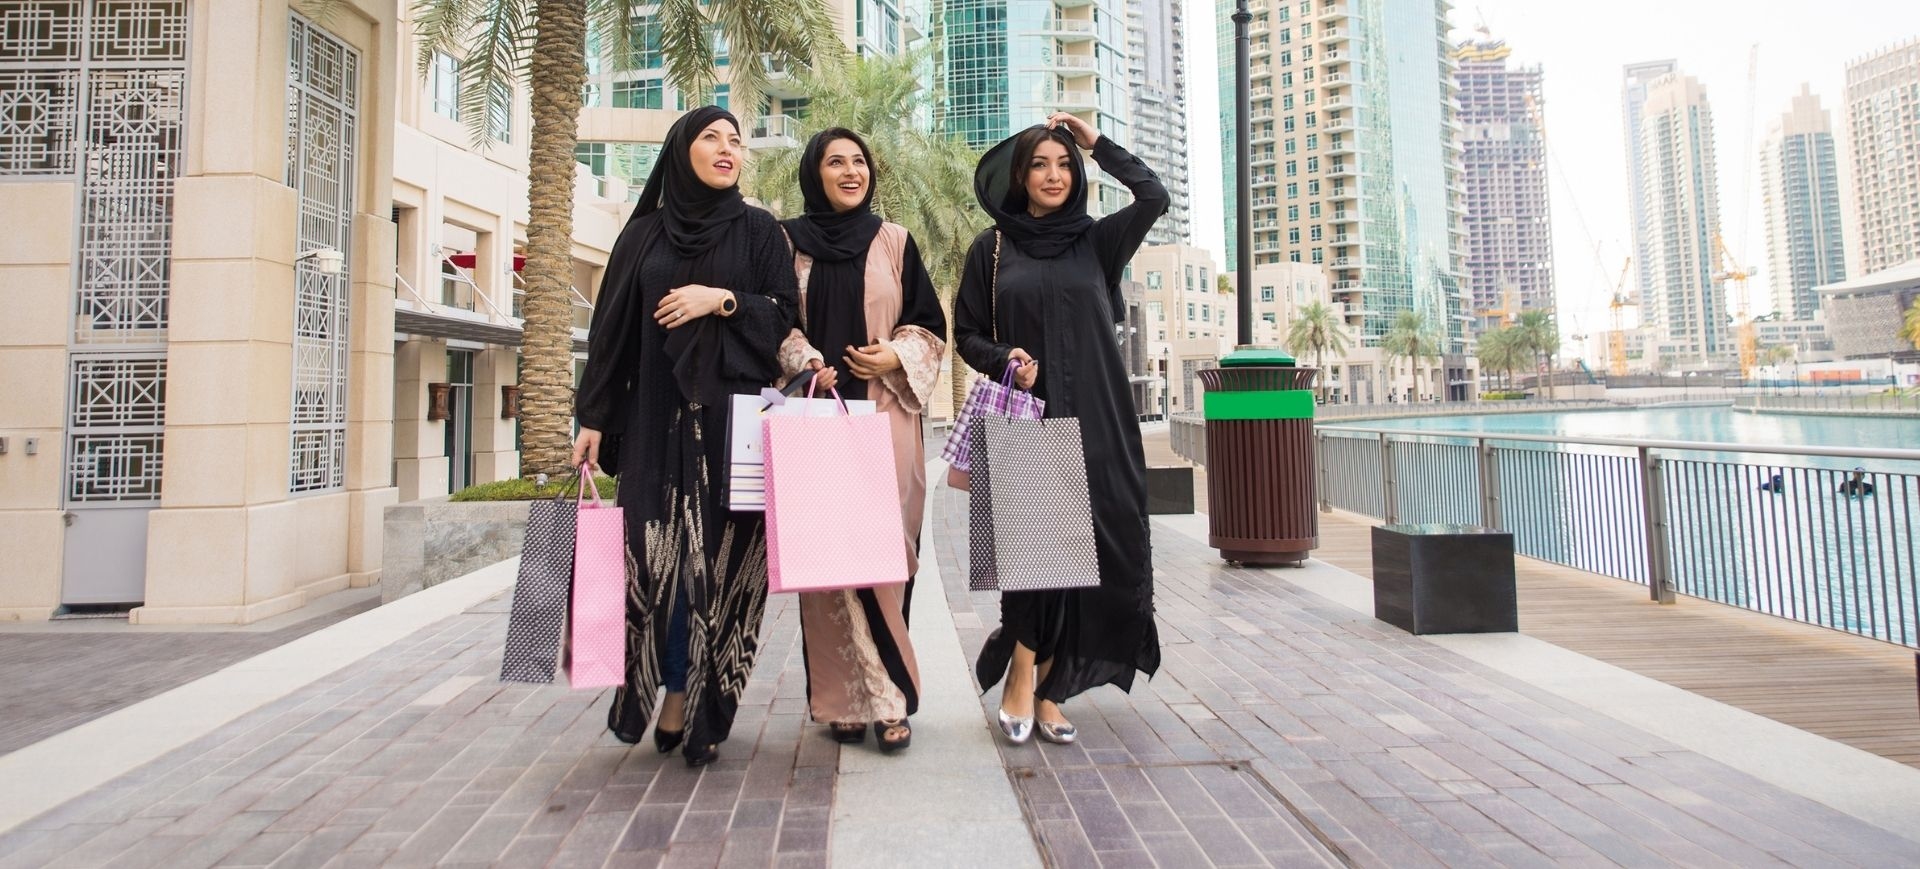 What to Dubai - Best clothing advice your trip in 2022